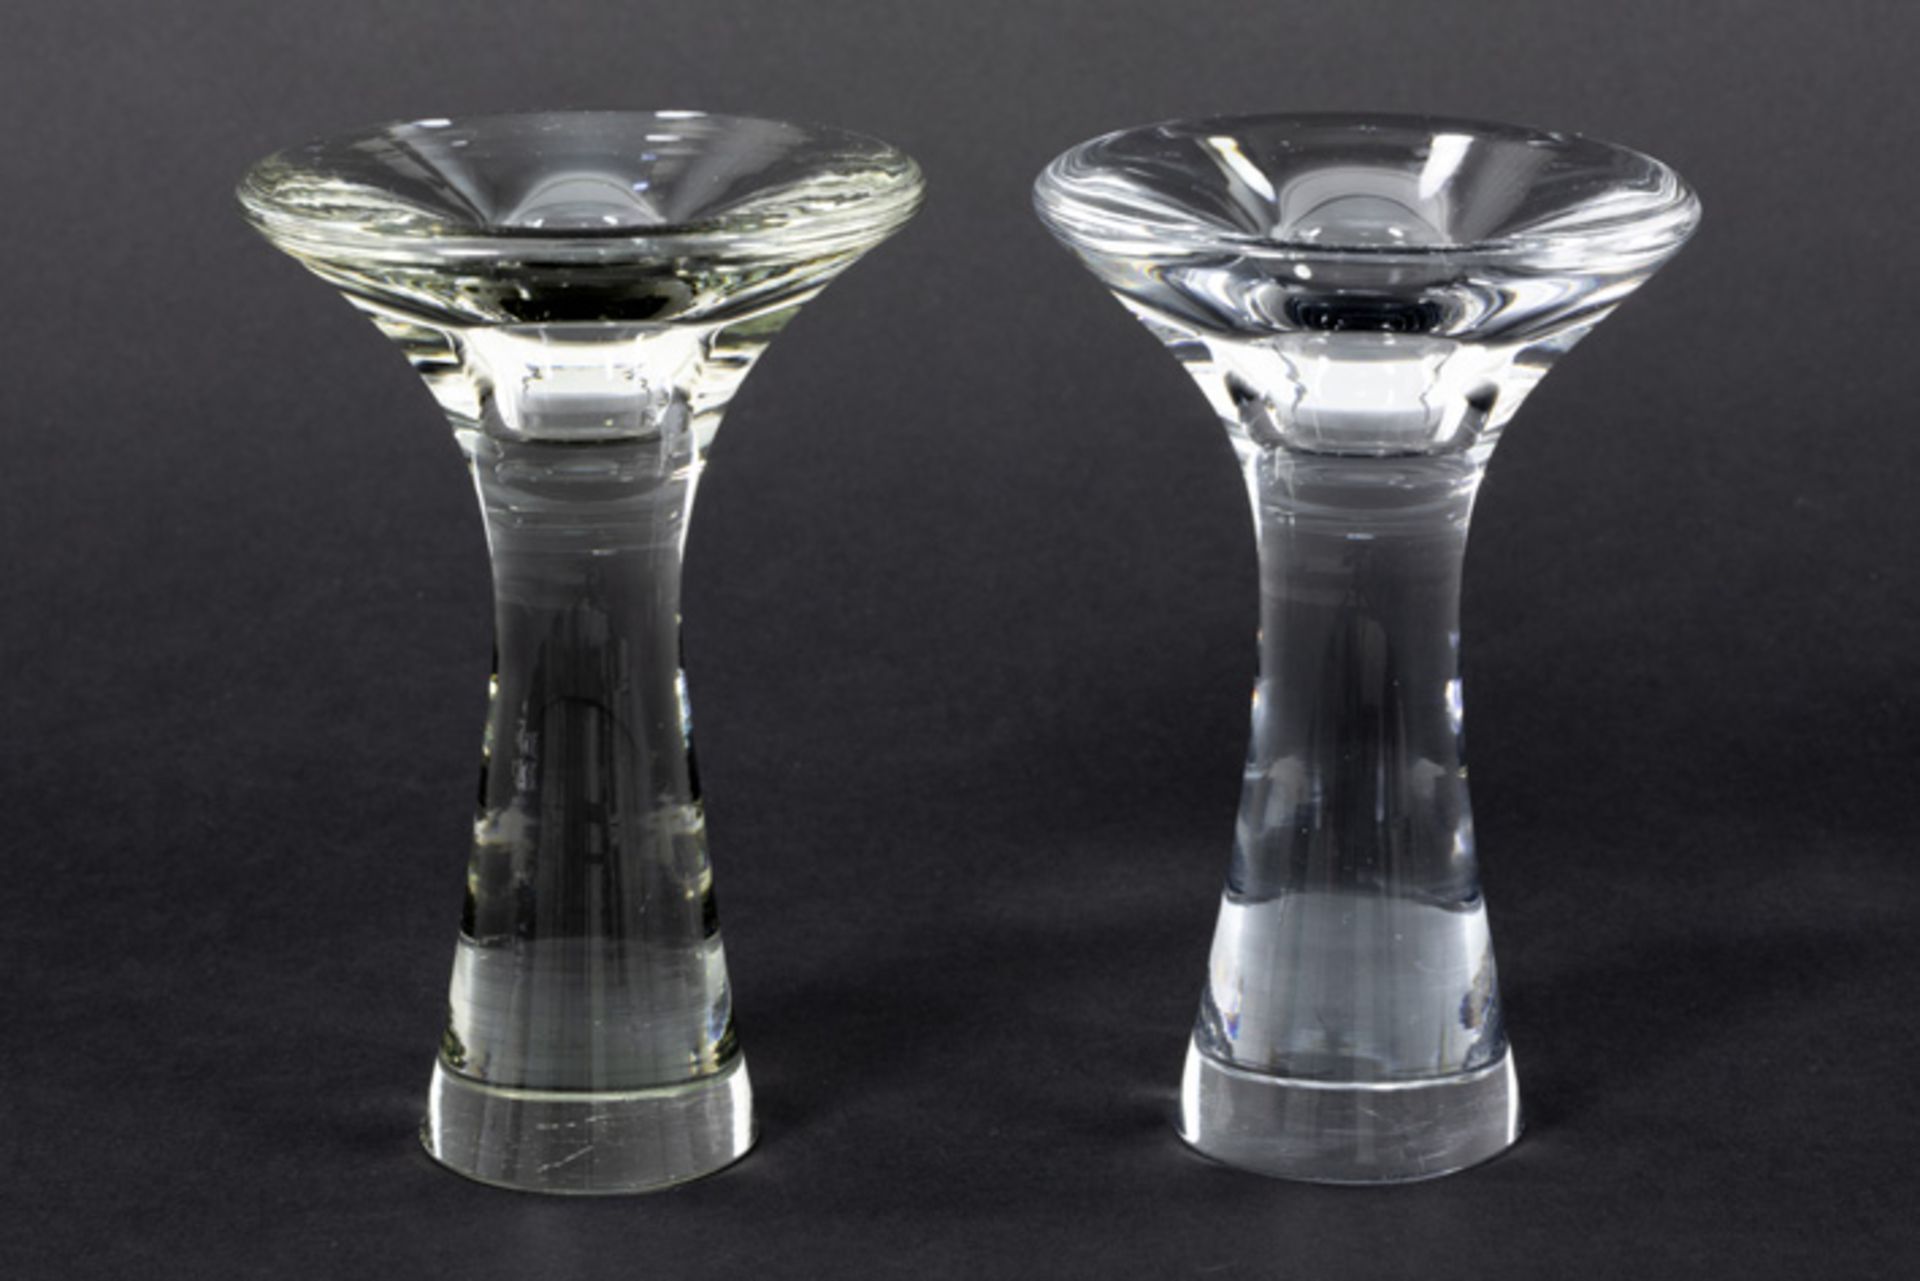 pair of Tapio Wirkkala sixties' candlesticks (model 3412) in glass - signed and numbered||TAPIO WIRK